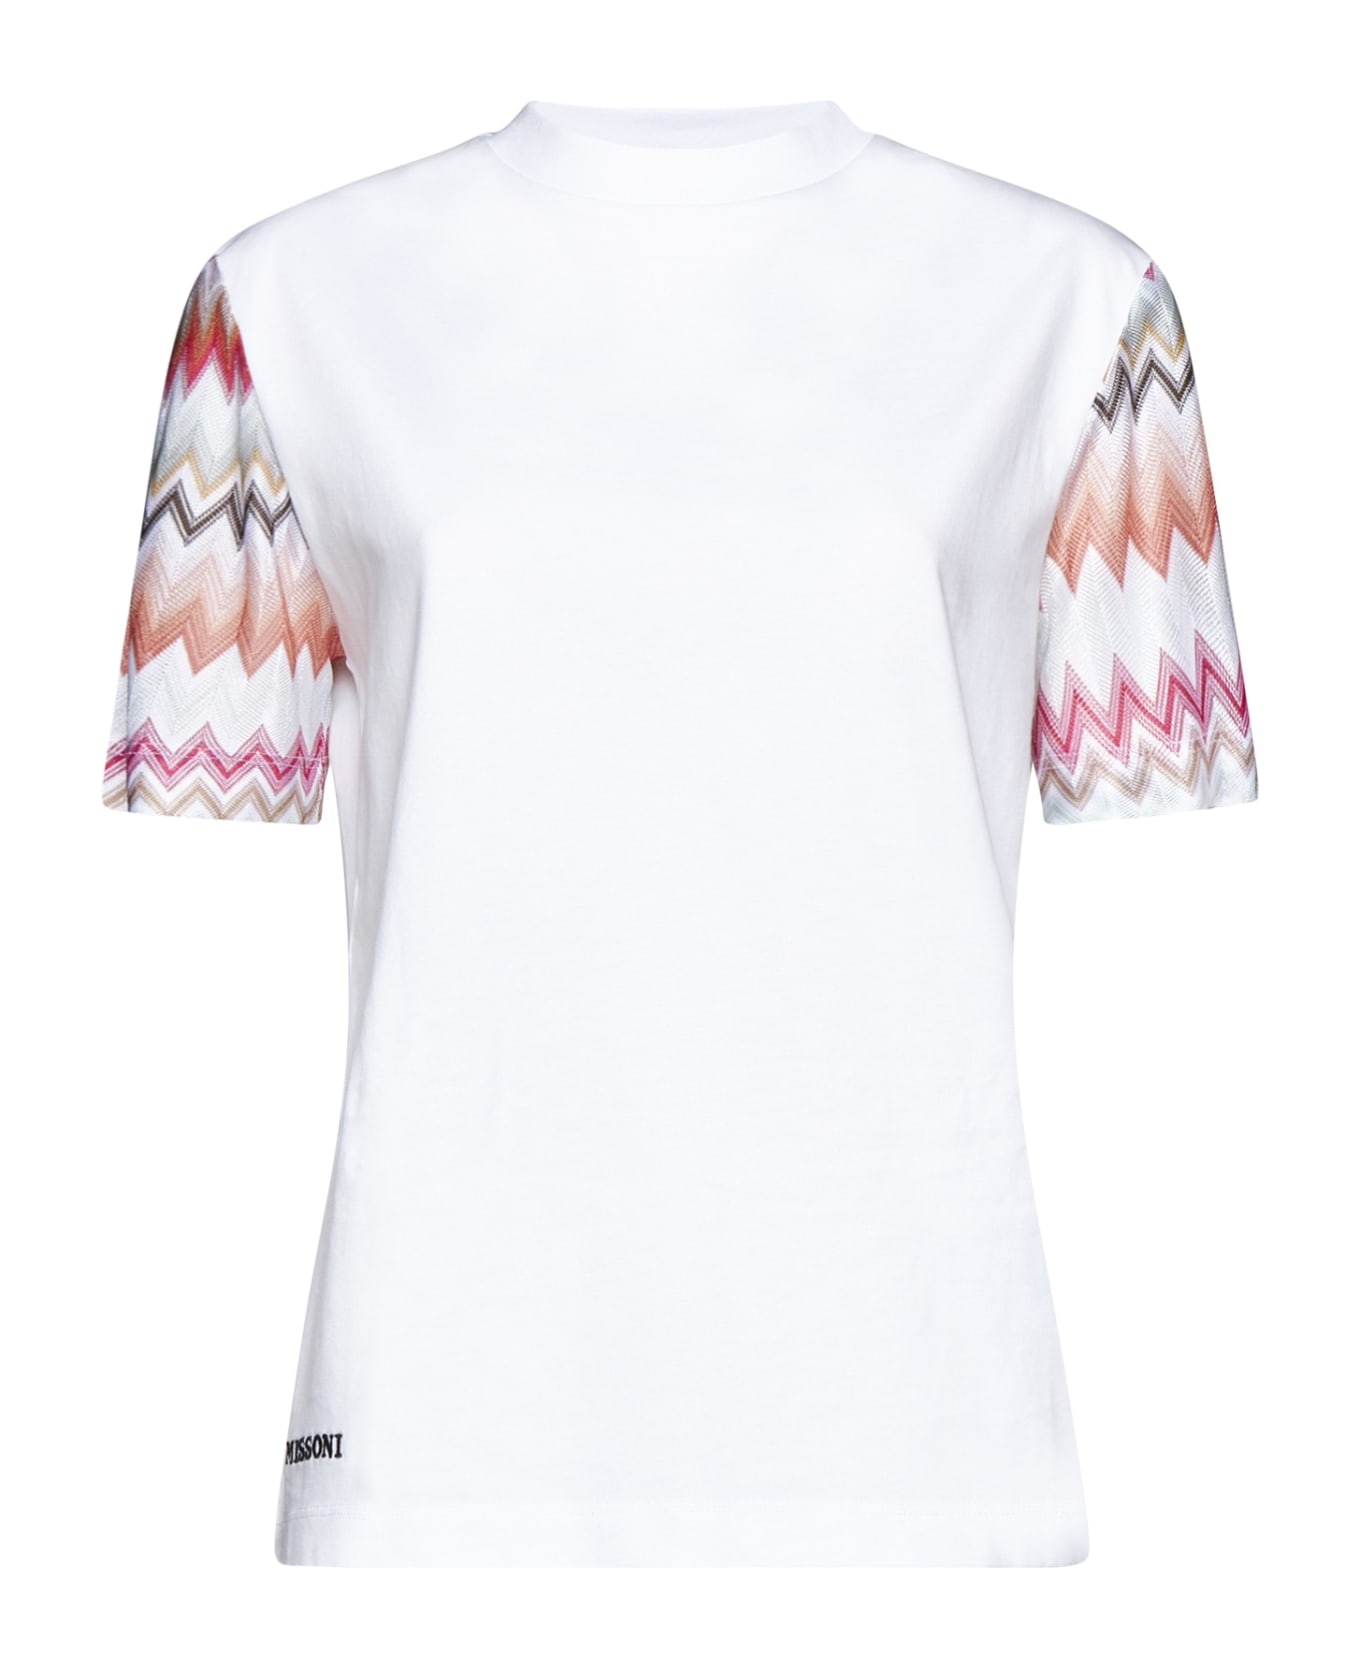 Missoni Logo Embroidered Zigzag Sleeved T-shirt - Lgt Tone Multic Wht